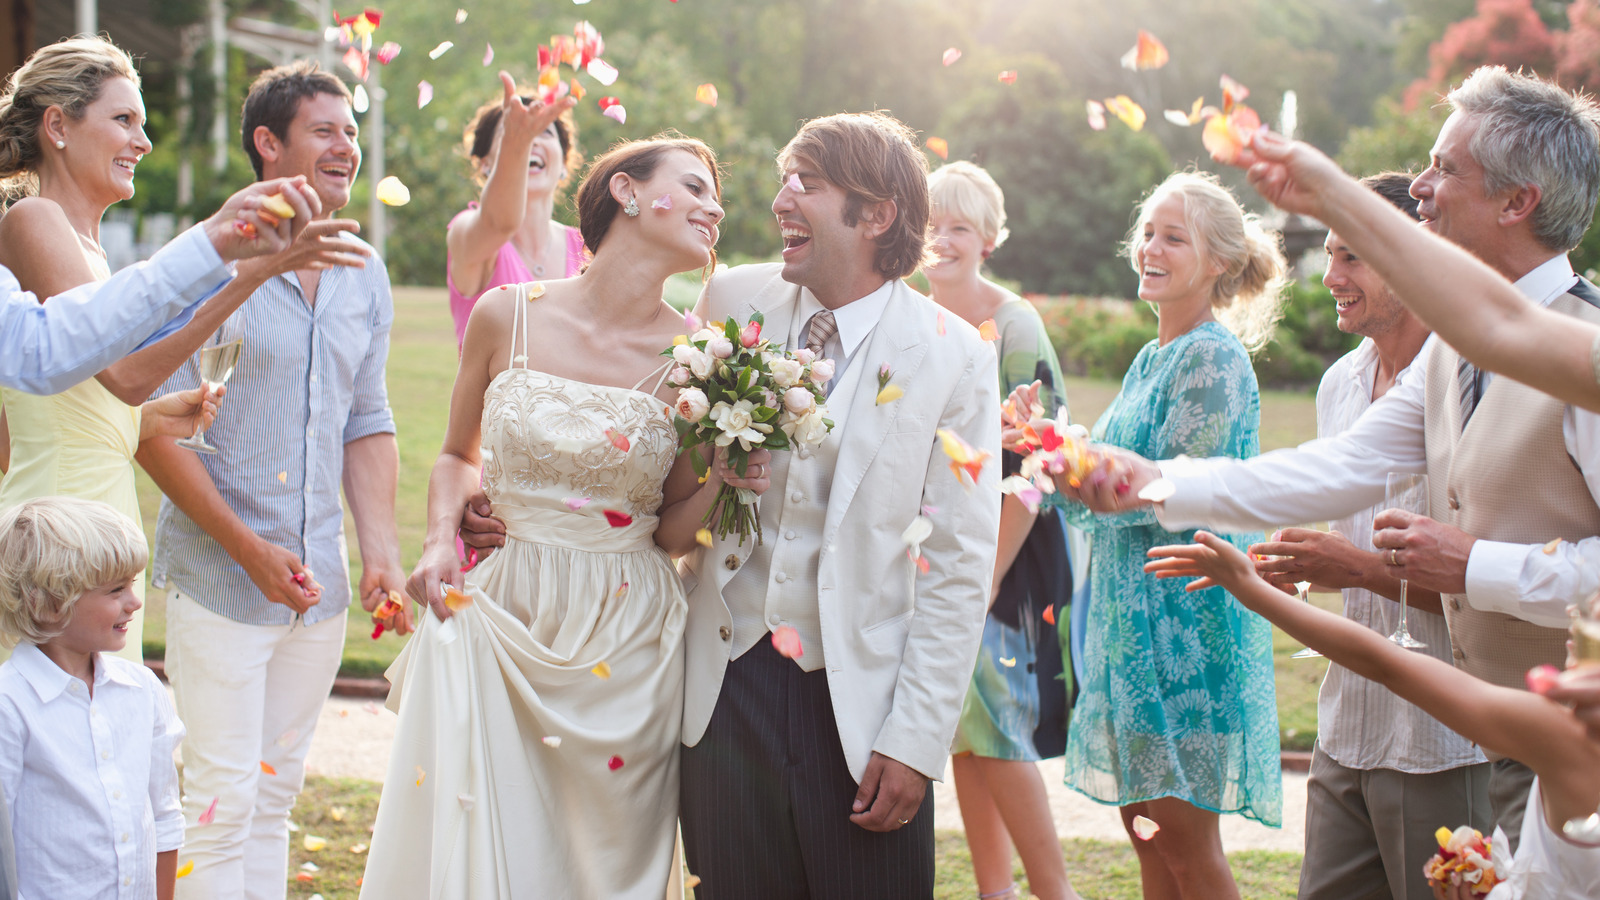 Tips For Treating Out-Of-Town Wedding Guests With Excellent Etiquette